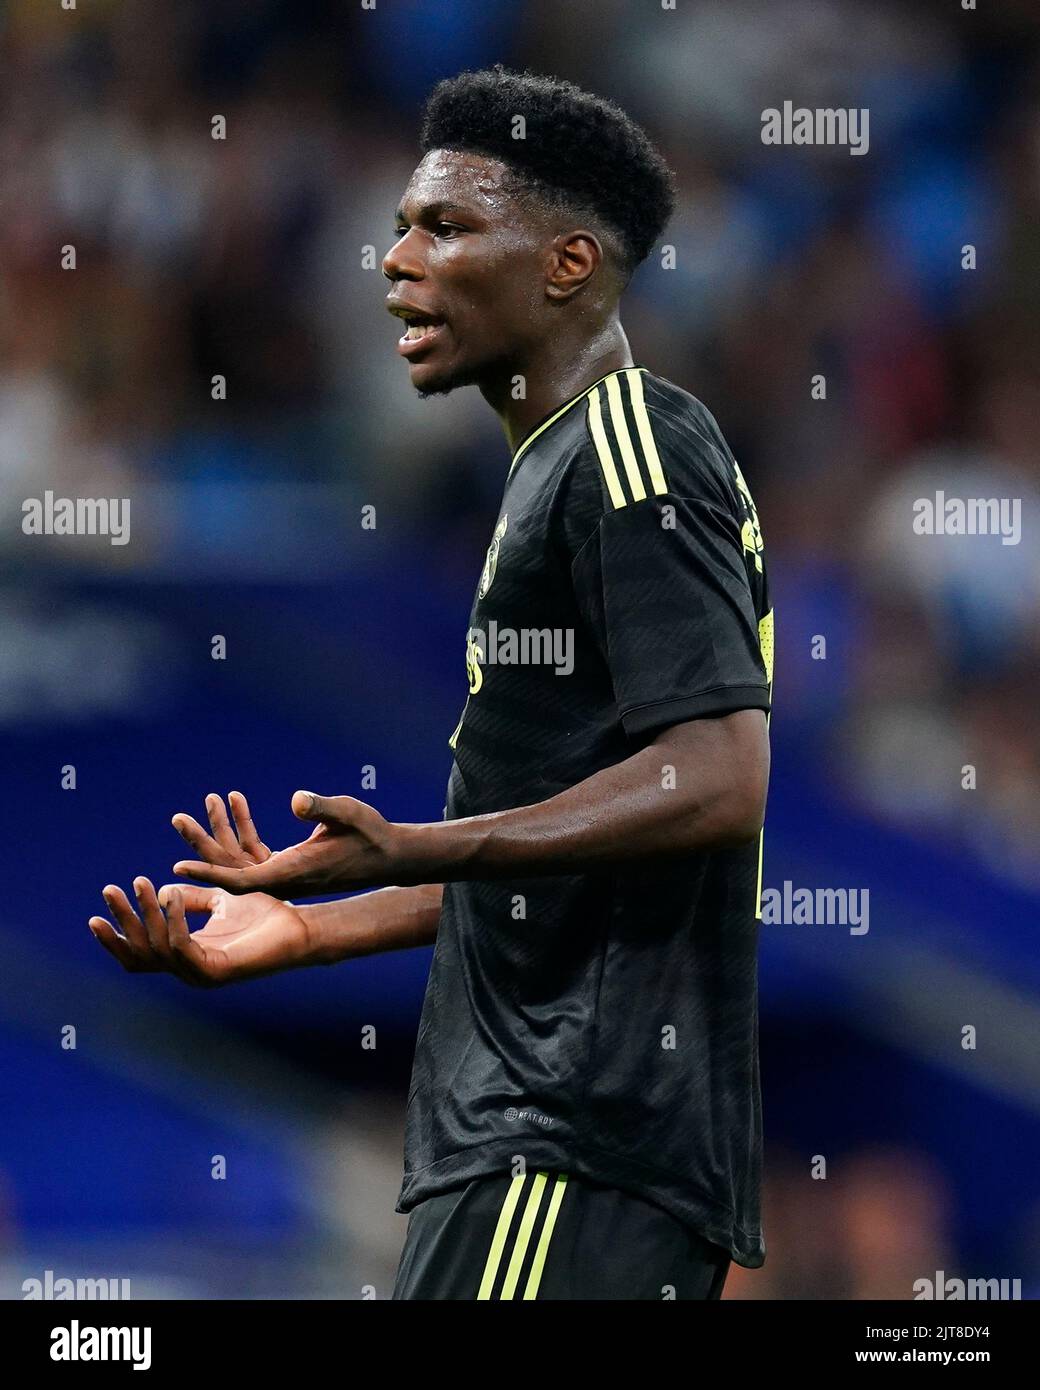 Barcelona, Spain. 28th Aug, 2022. Aurelien Tchouameni of Real Madrid during the La Liga match between RCD Espanyol and Real Madrid played at RCDE Stadium on August 28, 2022 in Barcelona, Spain. (Photo by Sergio Ruiz / PRESSIN) Credit: PRESSINPHOTO SPORTS AGENCY/Alamy Live News Stock Photo